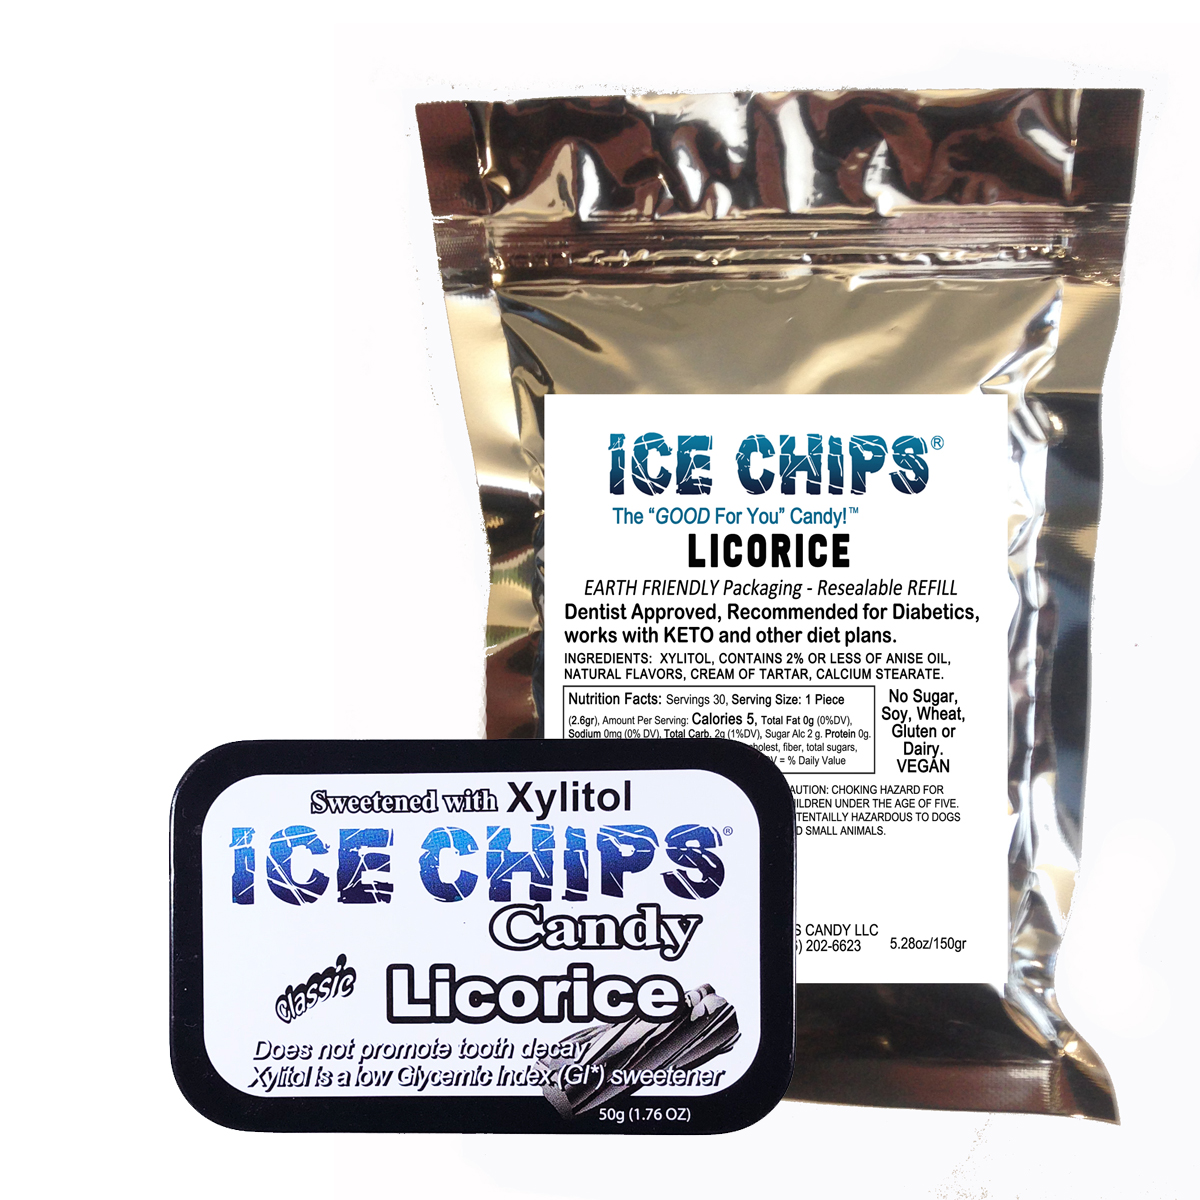 ICE CHIPS® Licorice Xylitol Candy